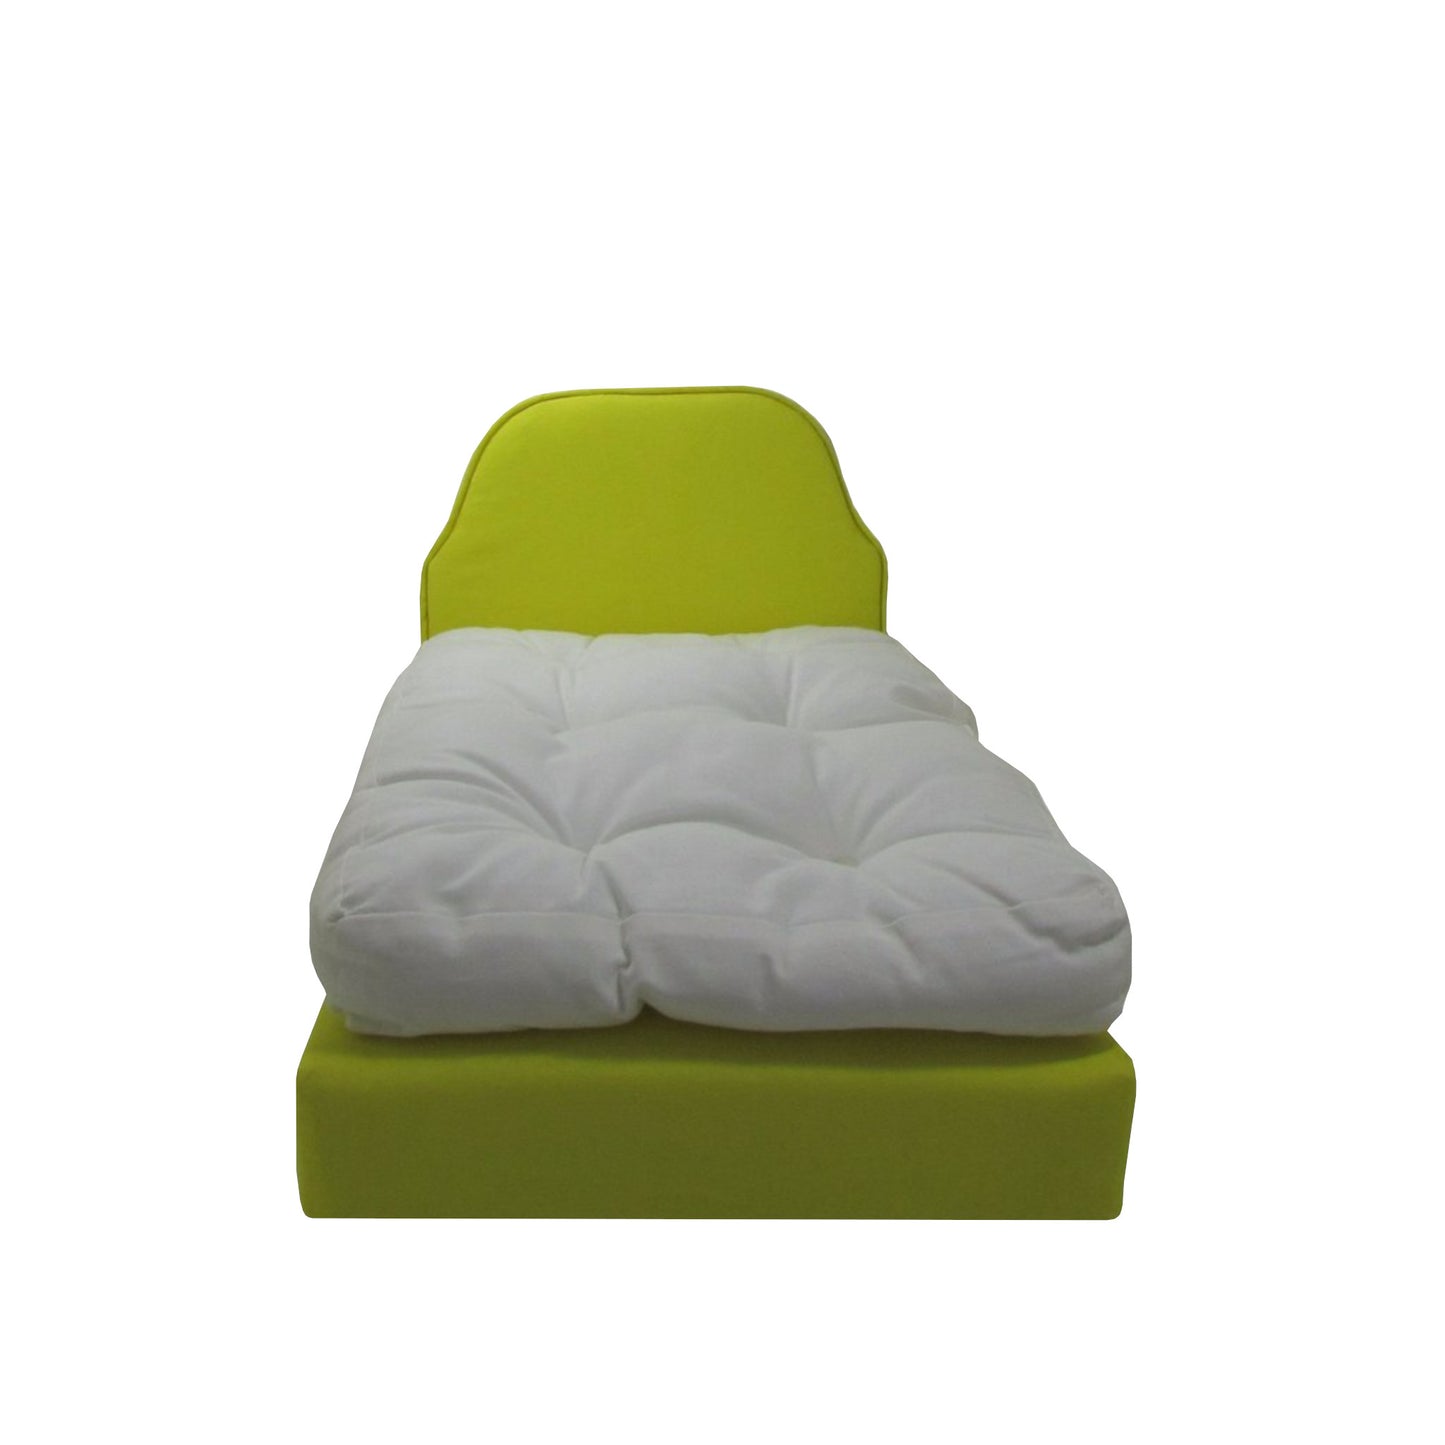 Upholstered Bright Yellow Doll Bed for 18-inch dolls Second view